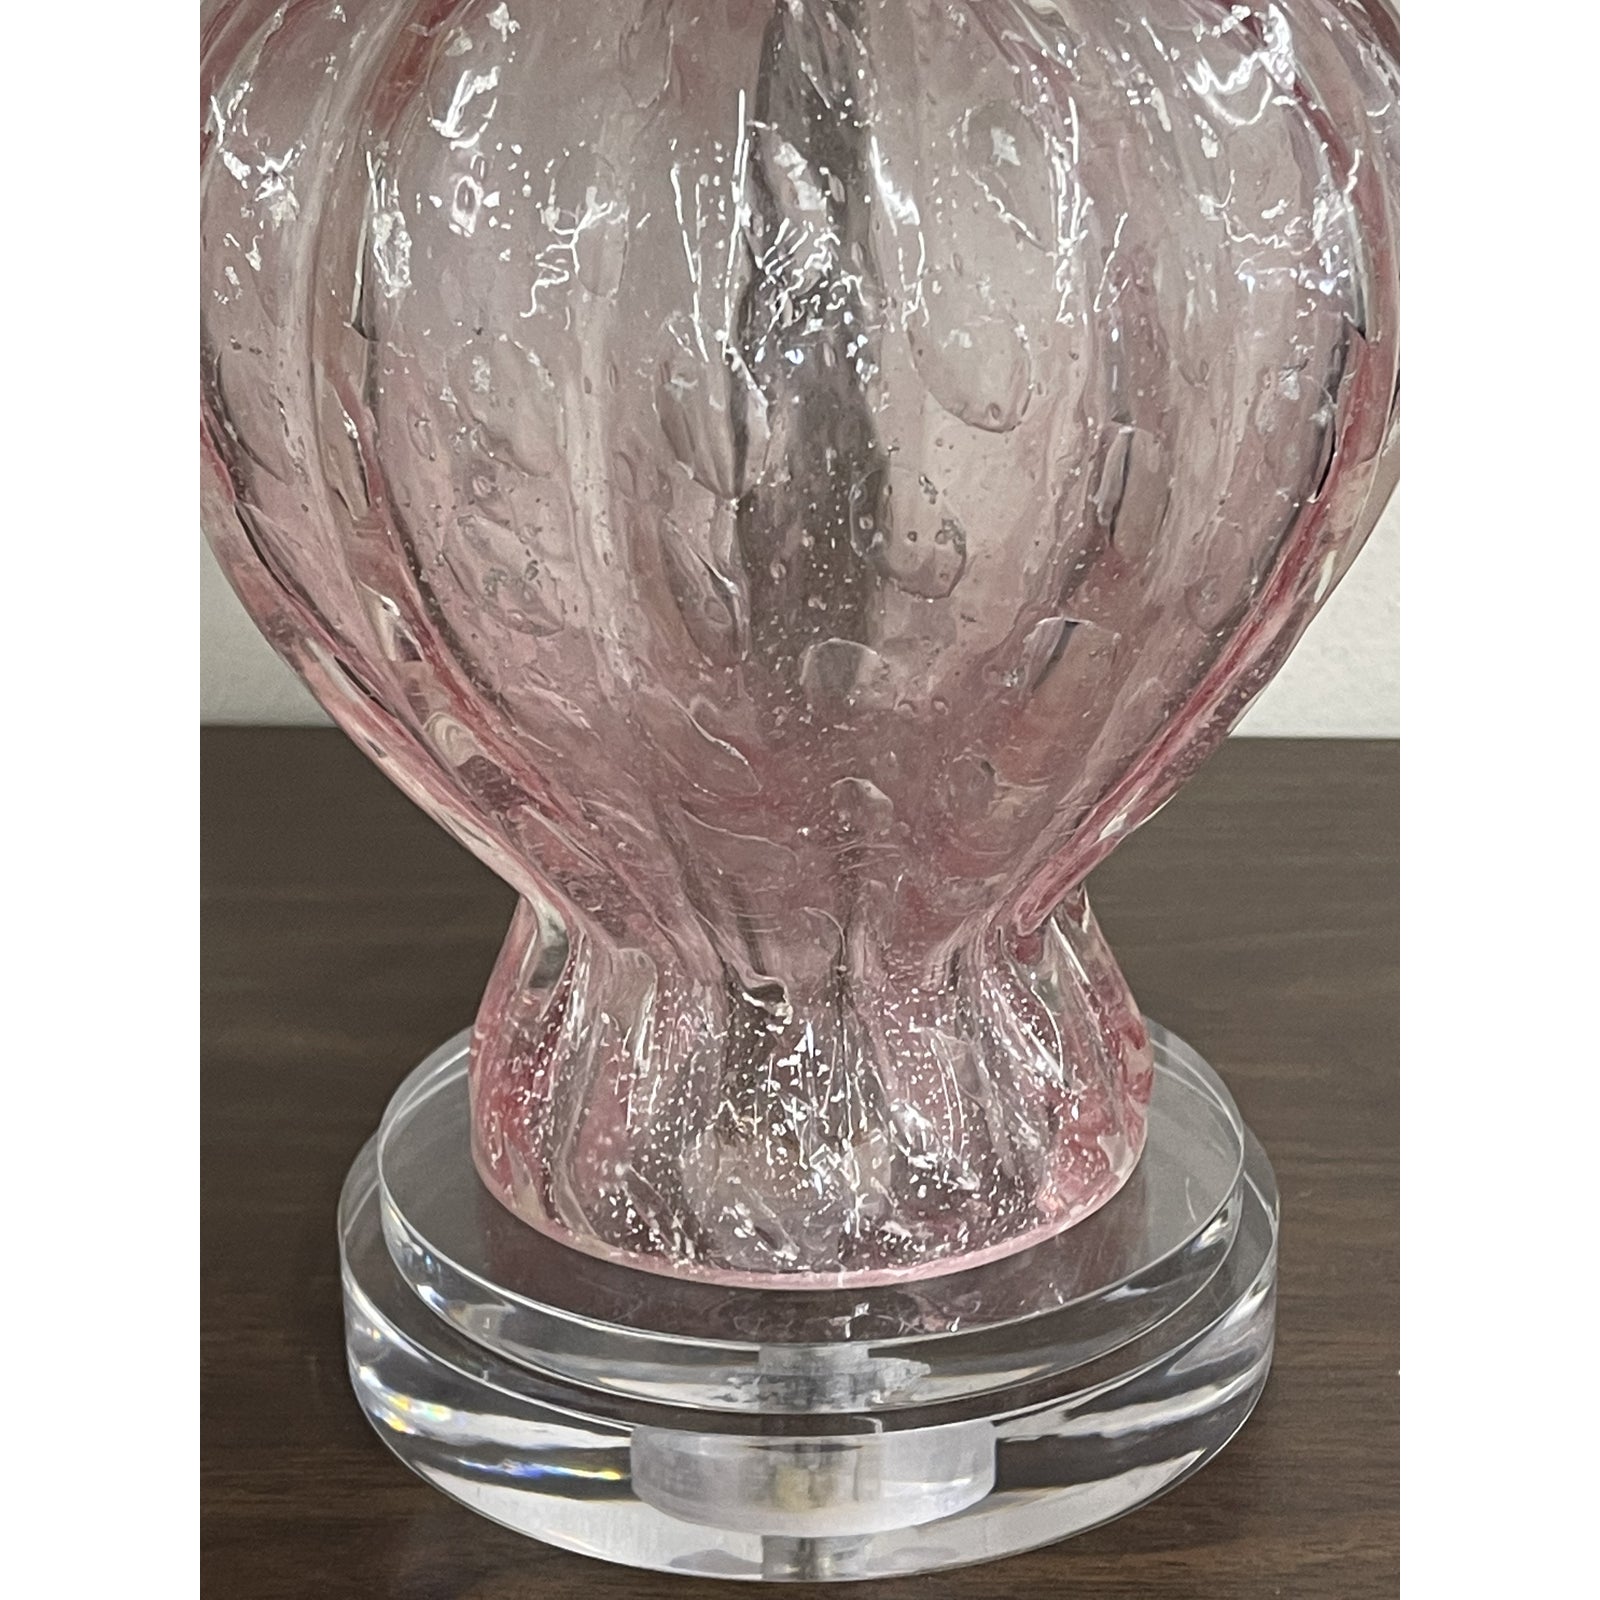 1960s-pink-murano-cotton-candy-lamp-2871